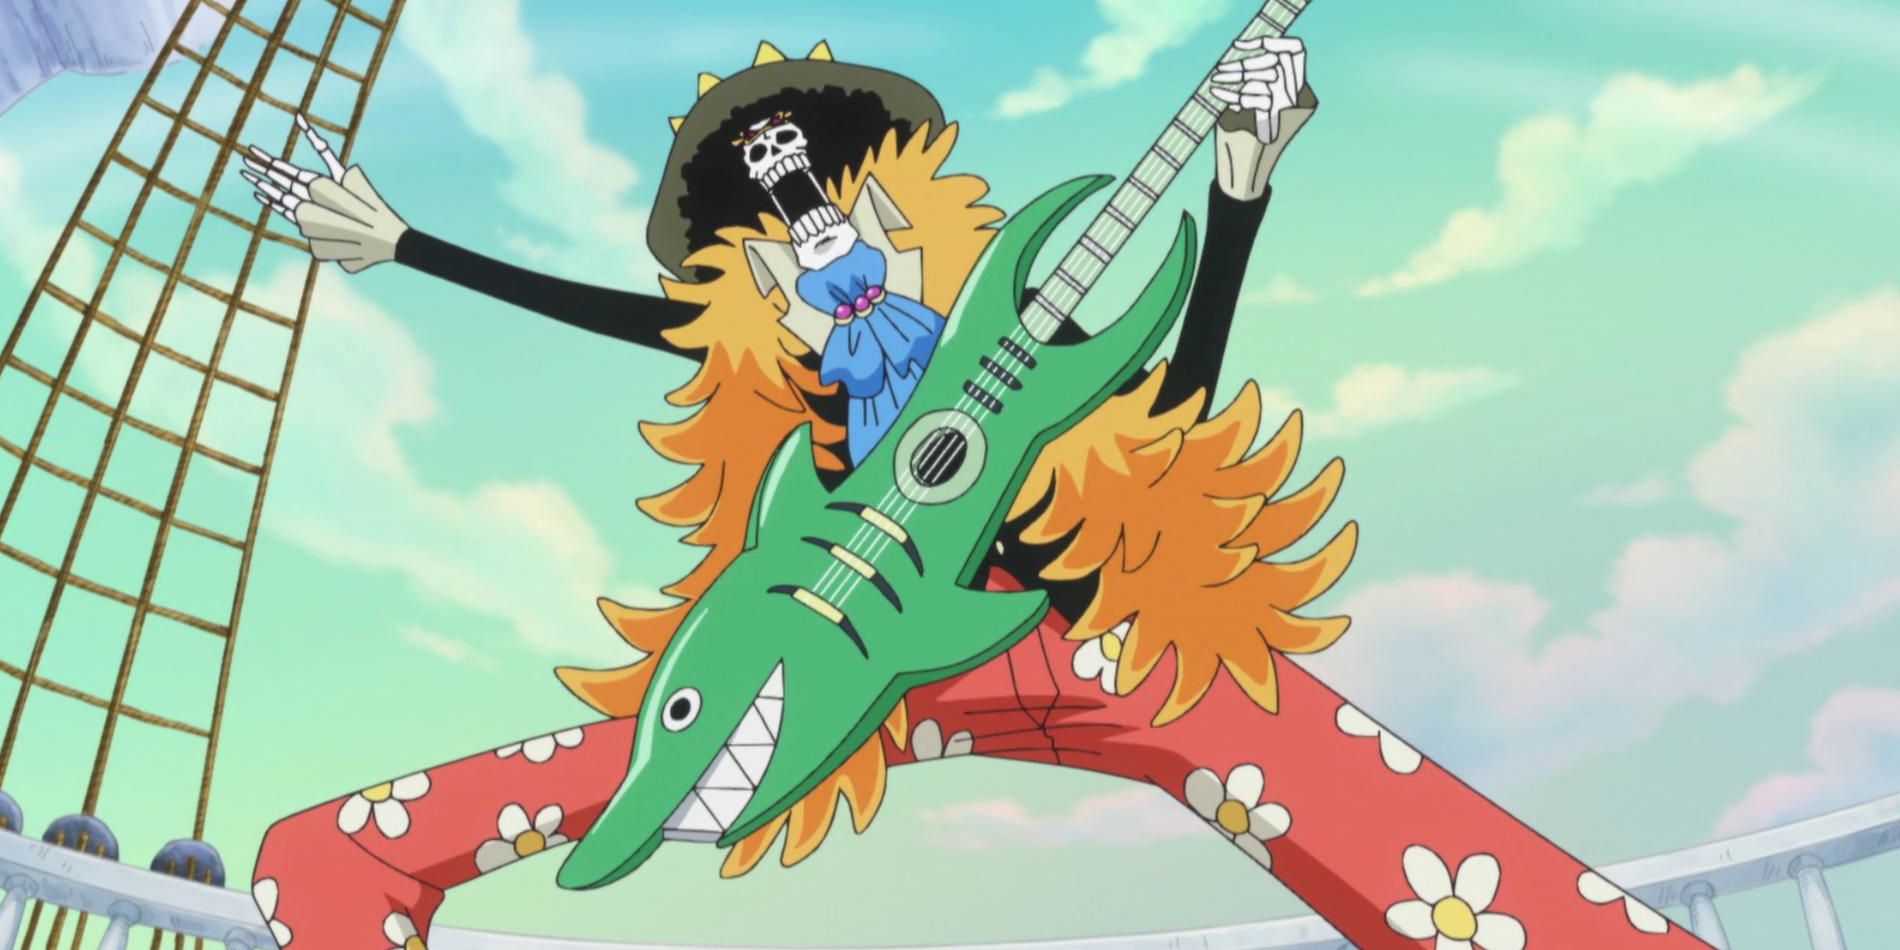 Screenshot from One Piece Anime shows Brook post Time Skip playing a Guitar.